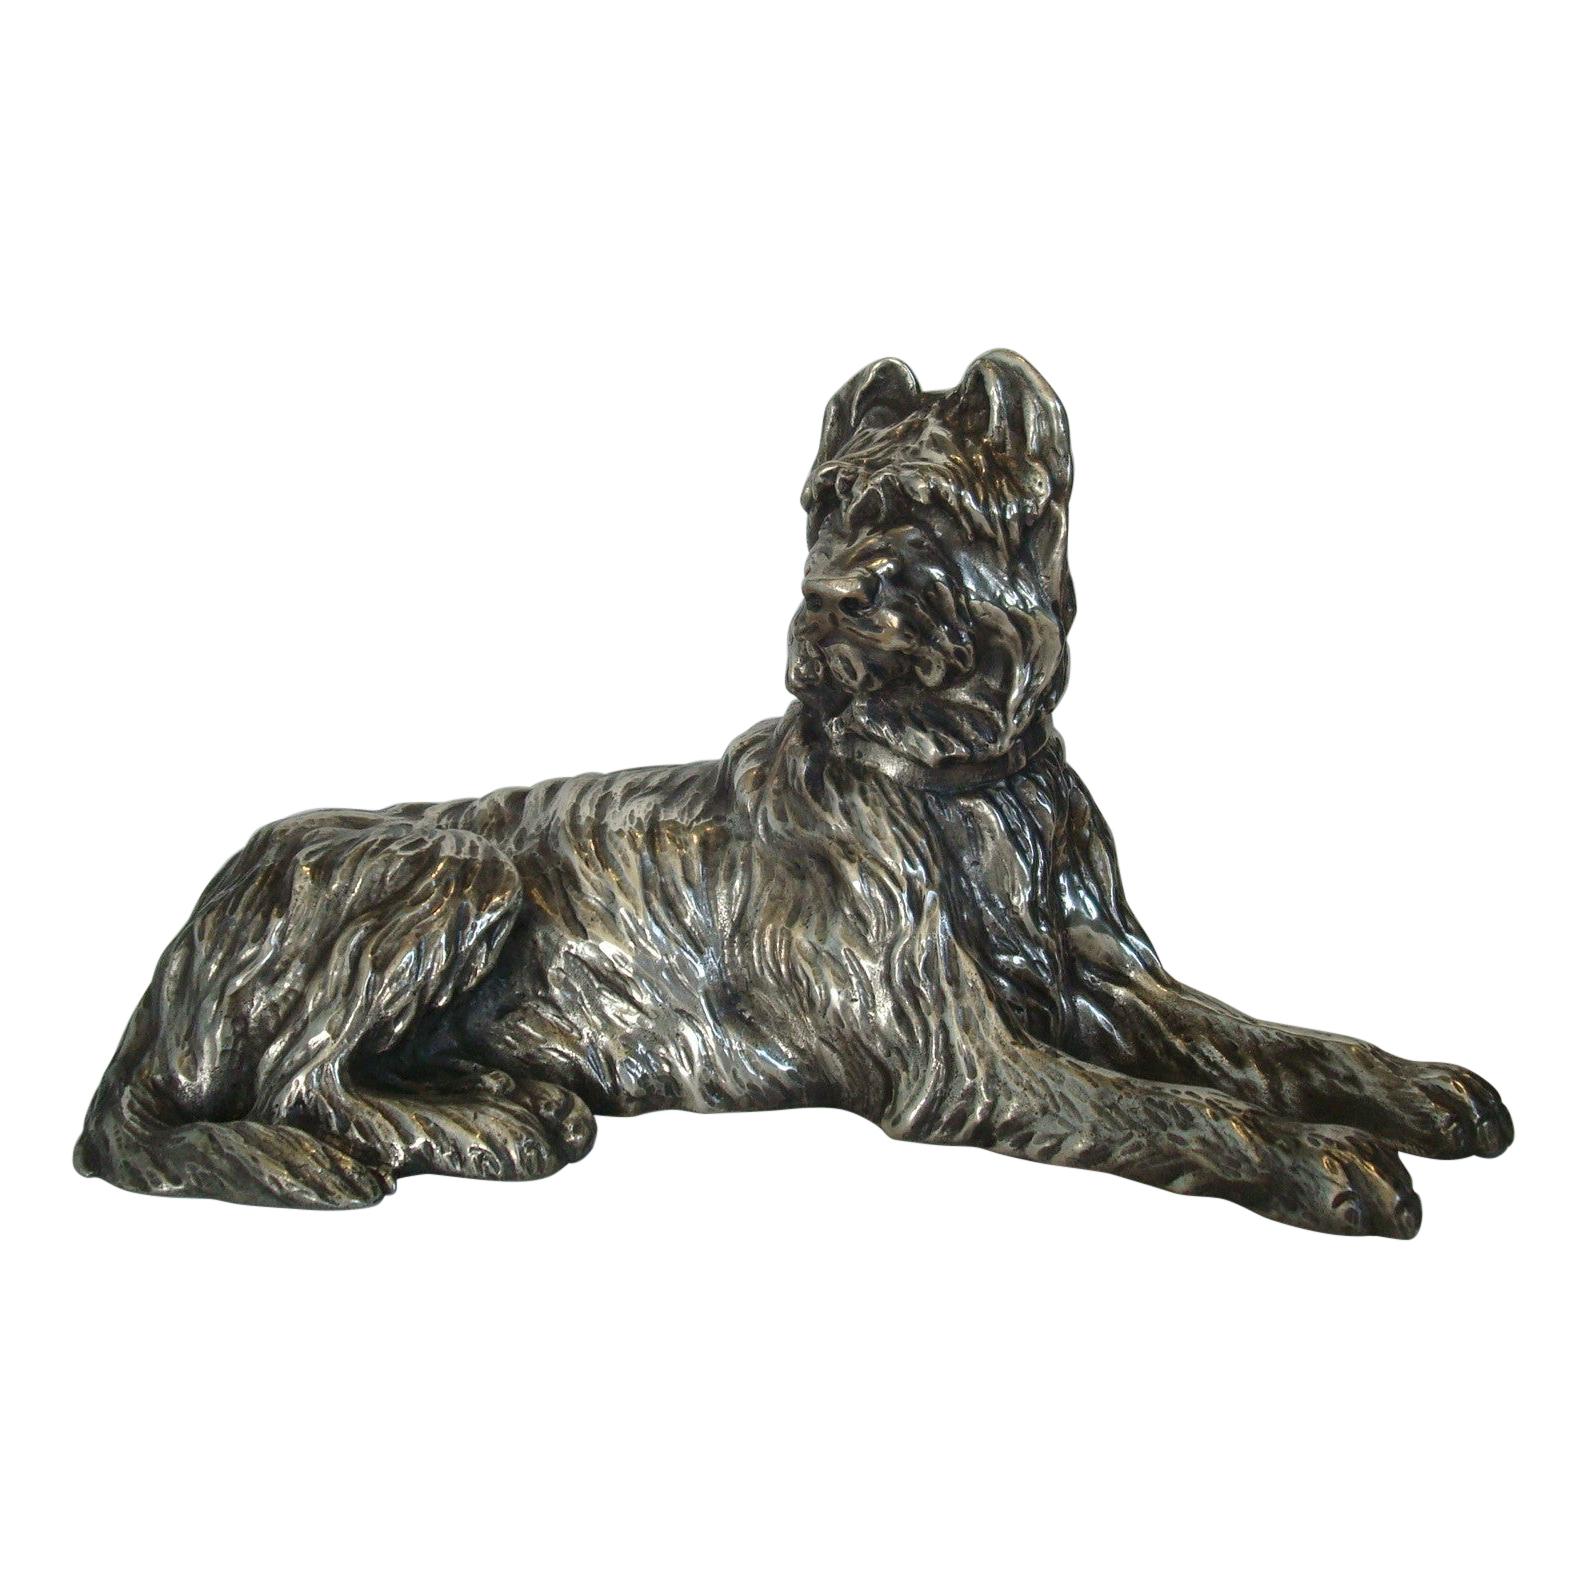 Silvered Bronze Sculpture of a Briard Dog Signed Sanson, France, 1900